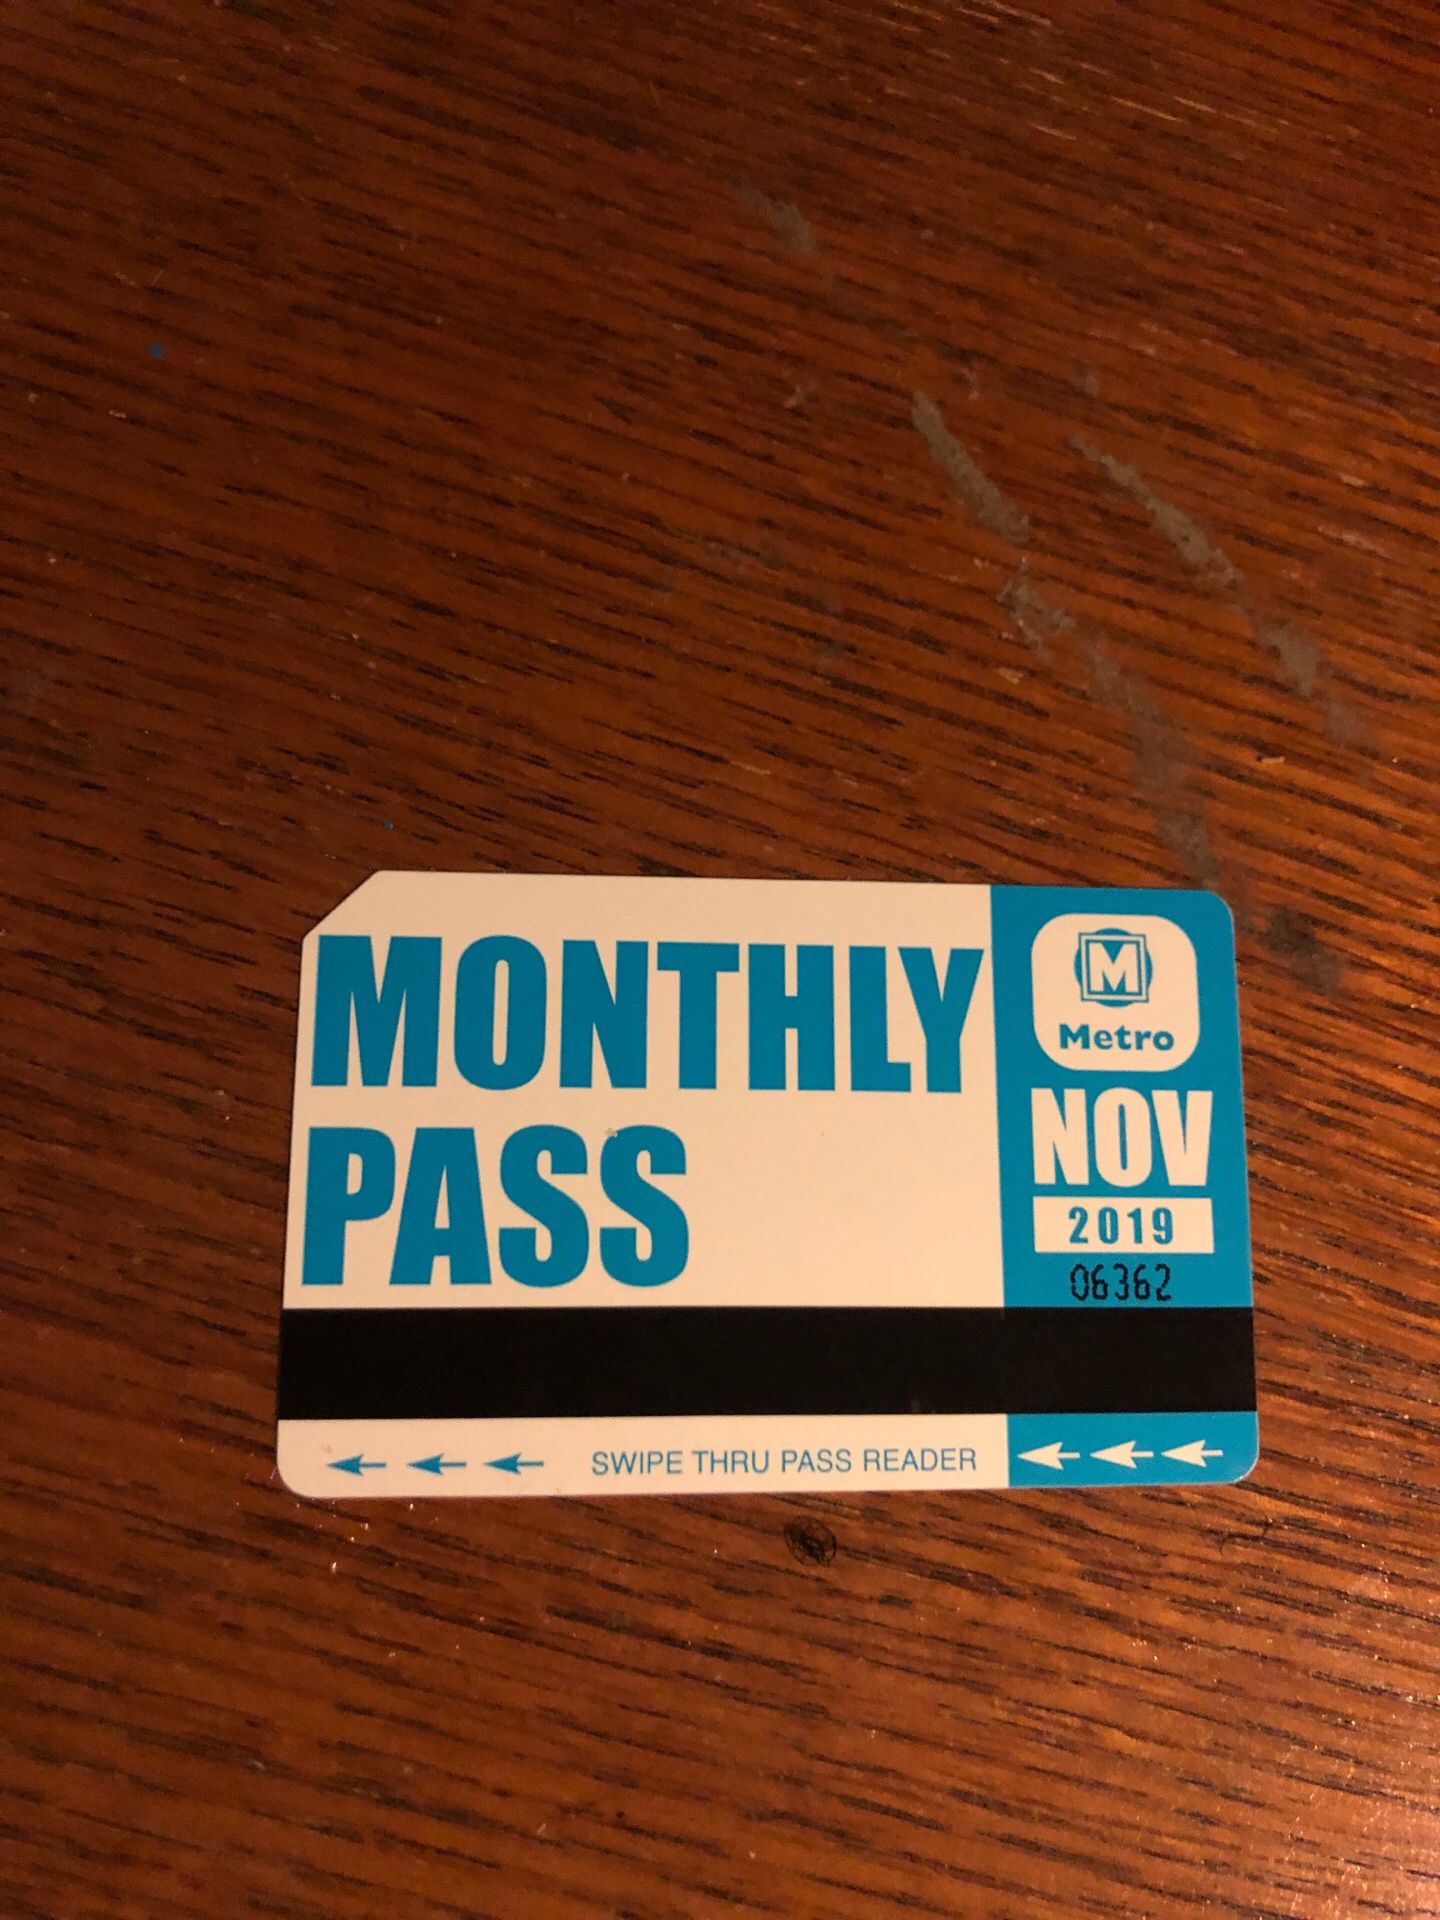 November monthly pass